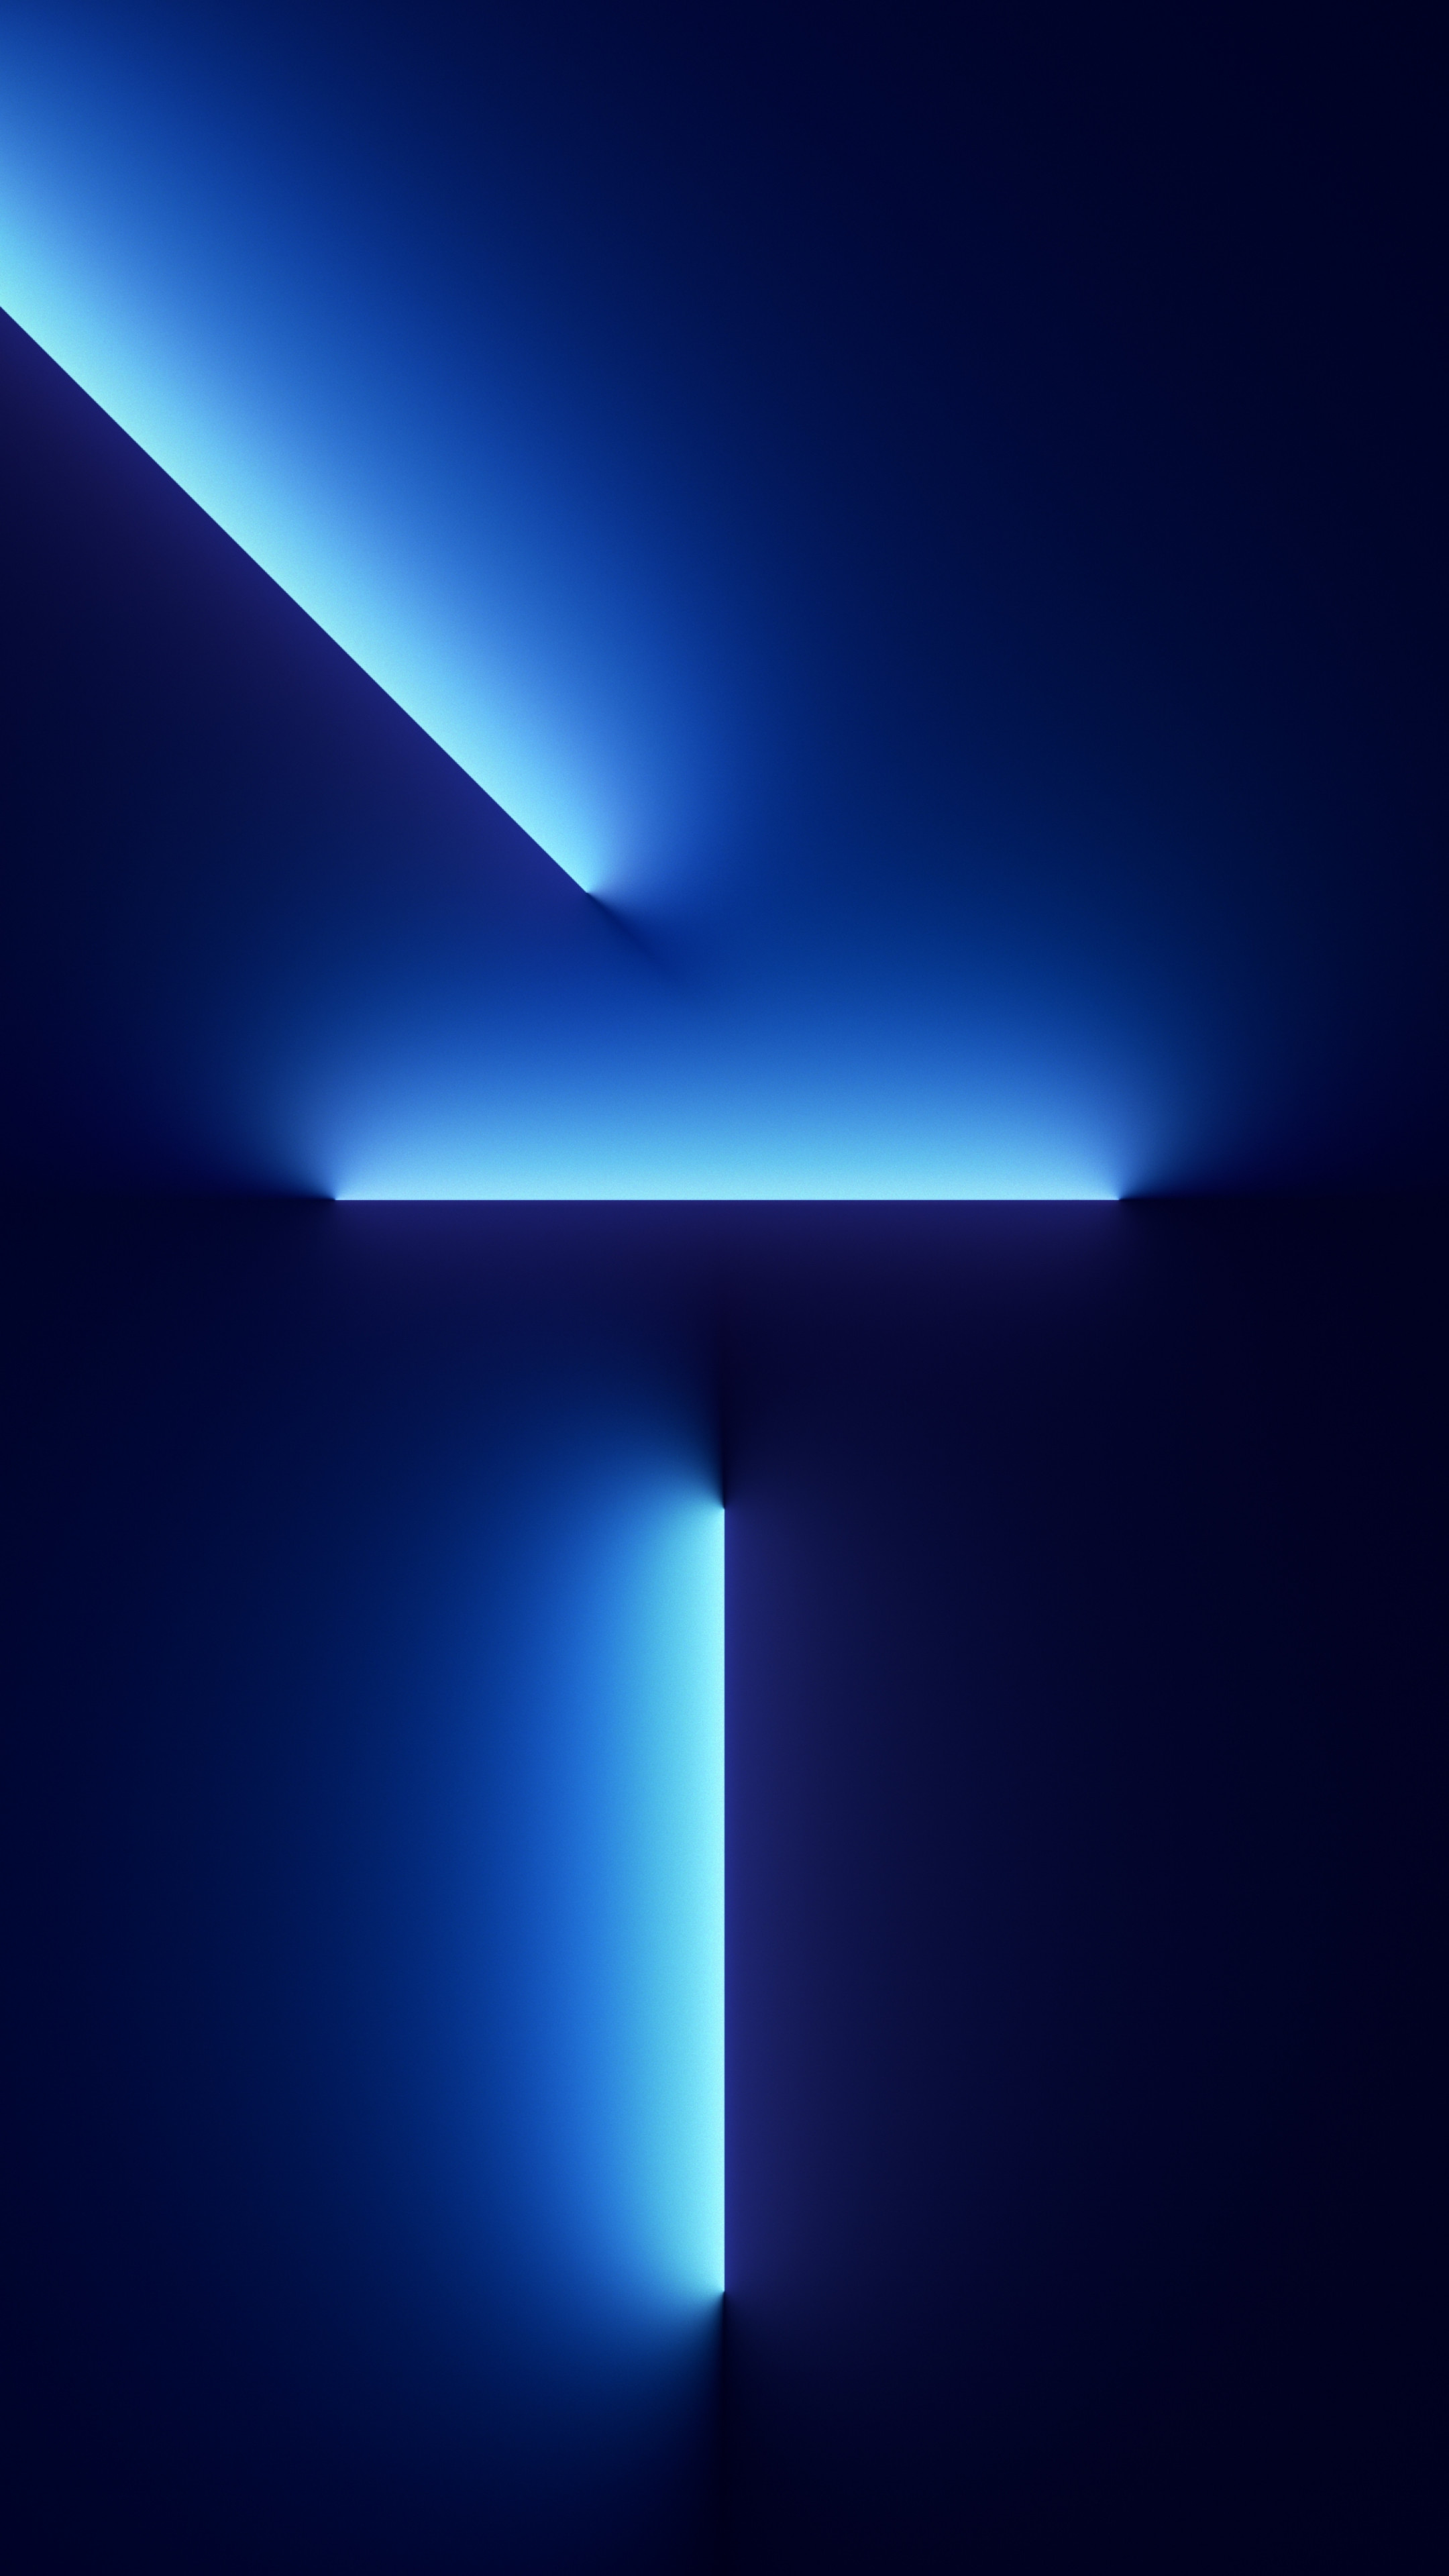 Wallpaper iPhone 13 Pro, light beams, abstract, iOS 15, Apple September  2021 Event, 4K, OS #23698 - Page 4